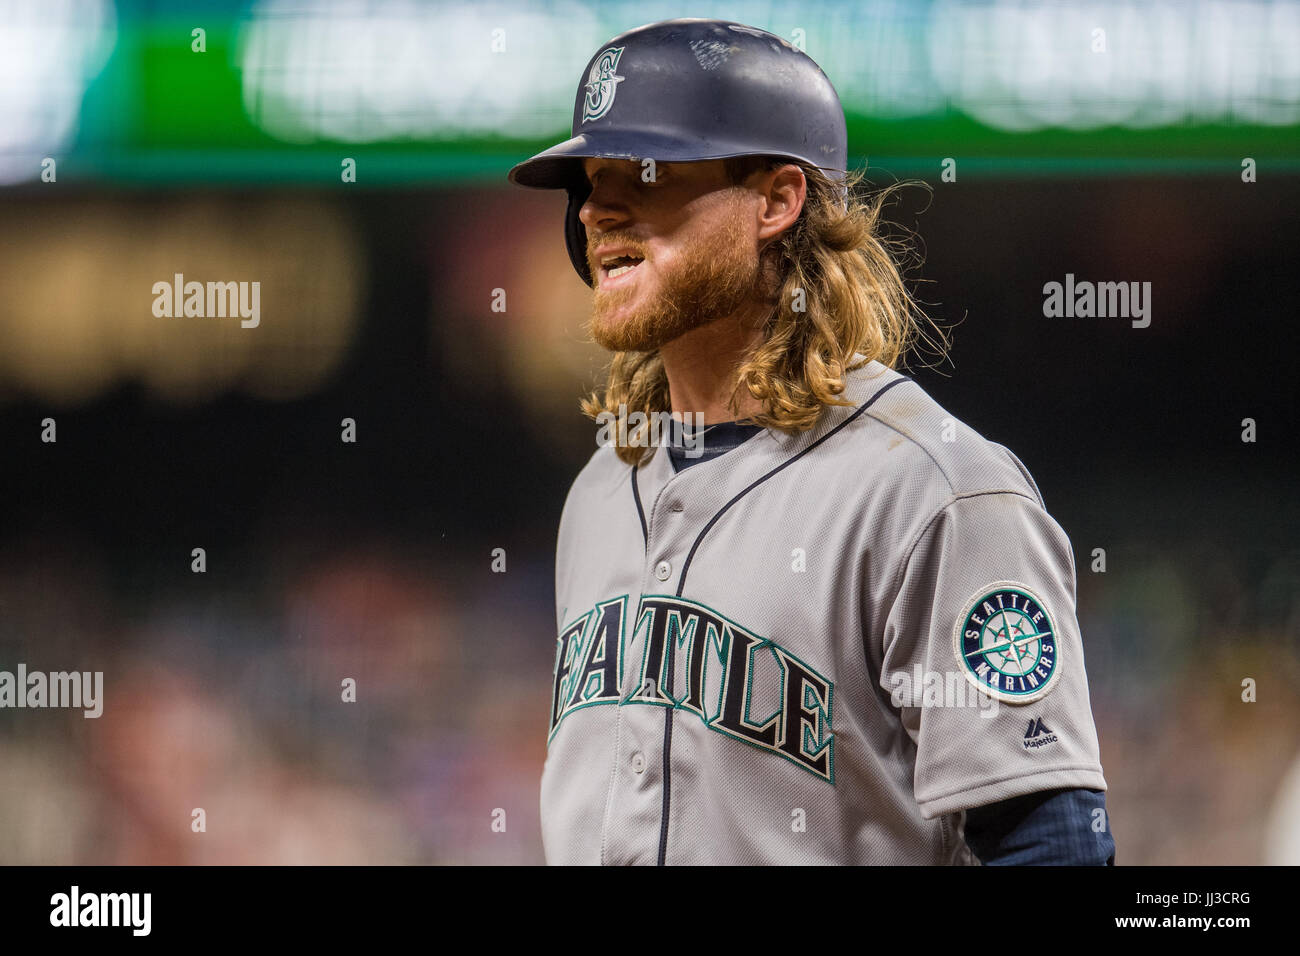 Houston, TX, USA. 17th July, 2017. Seattle Mariners right fielder Ben Gamel (16) during a Major League Baseball game between the Houston Astros and the Seattle Mariners at Minute Maid Park in Houston, TX. Trask Smith/CSM/Alamy Live News Stock Photo